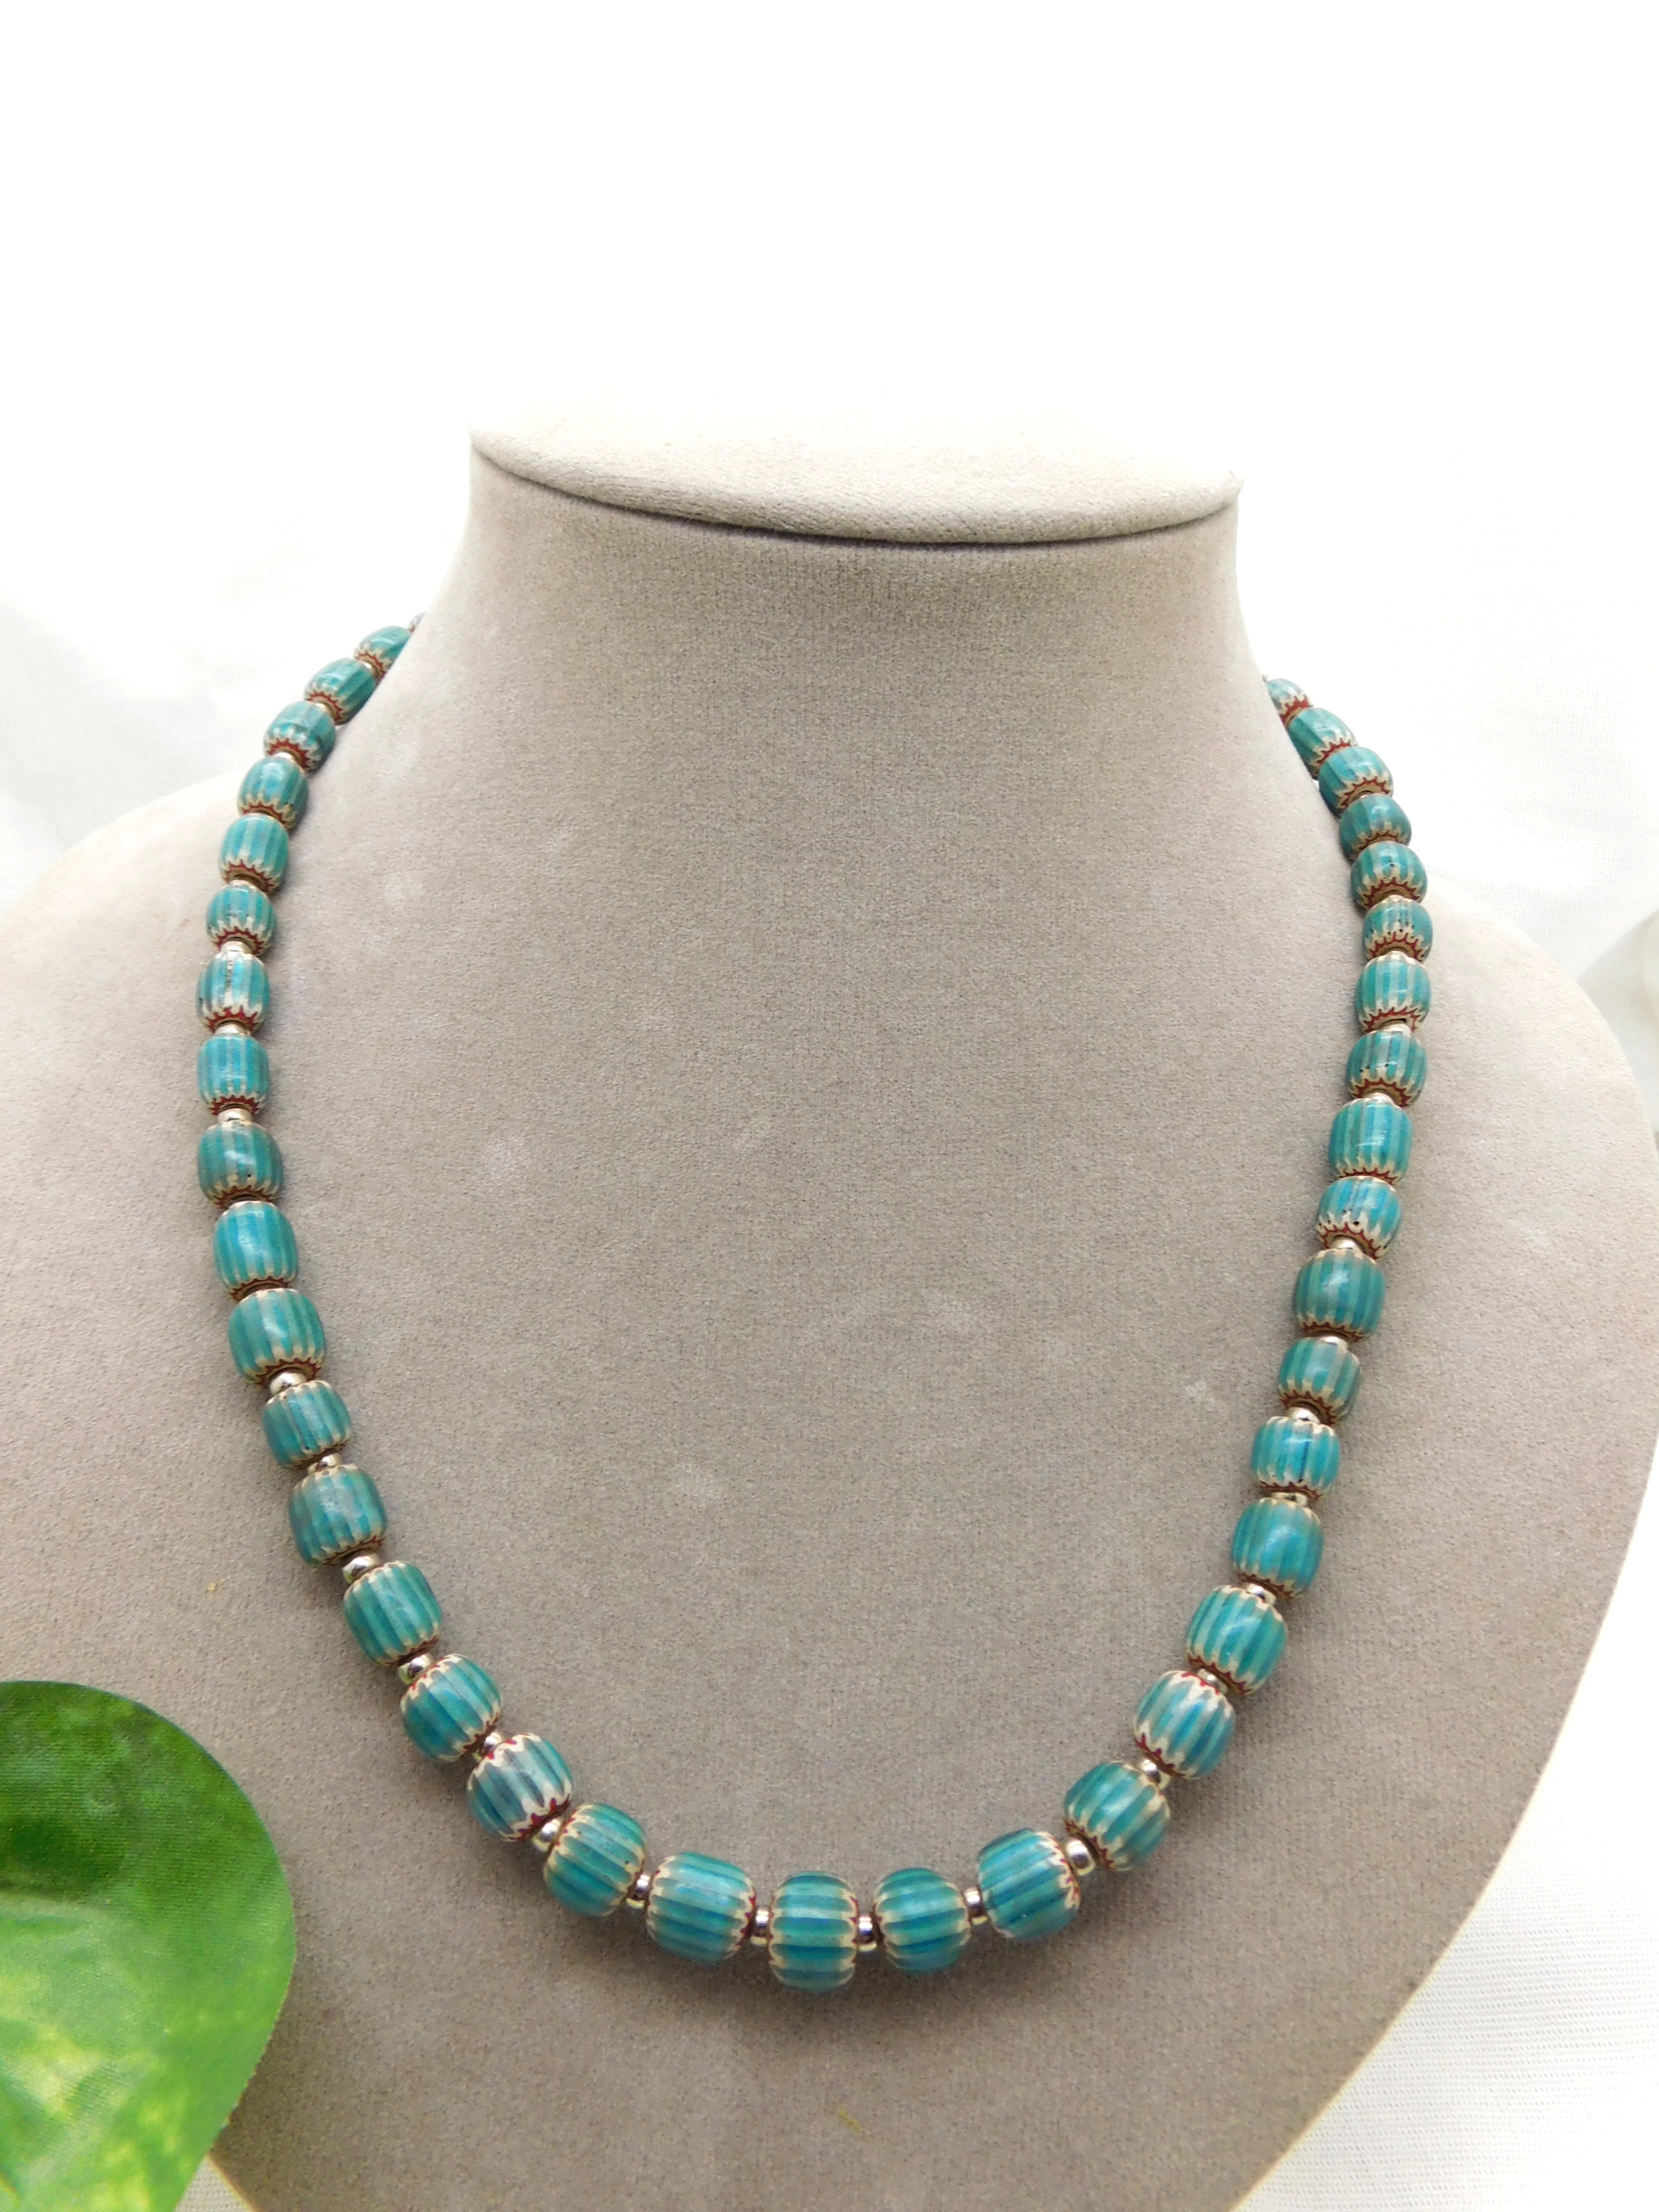 Necklace with turquoise chevron glass beads - antique look